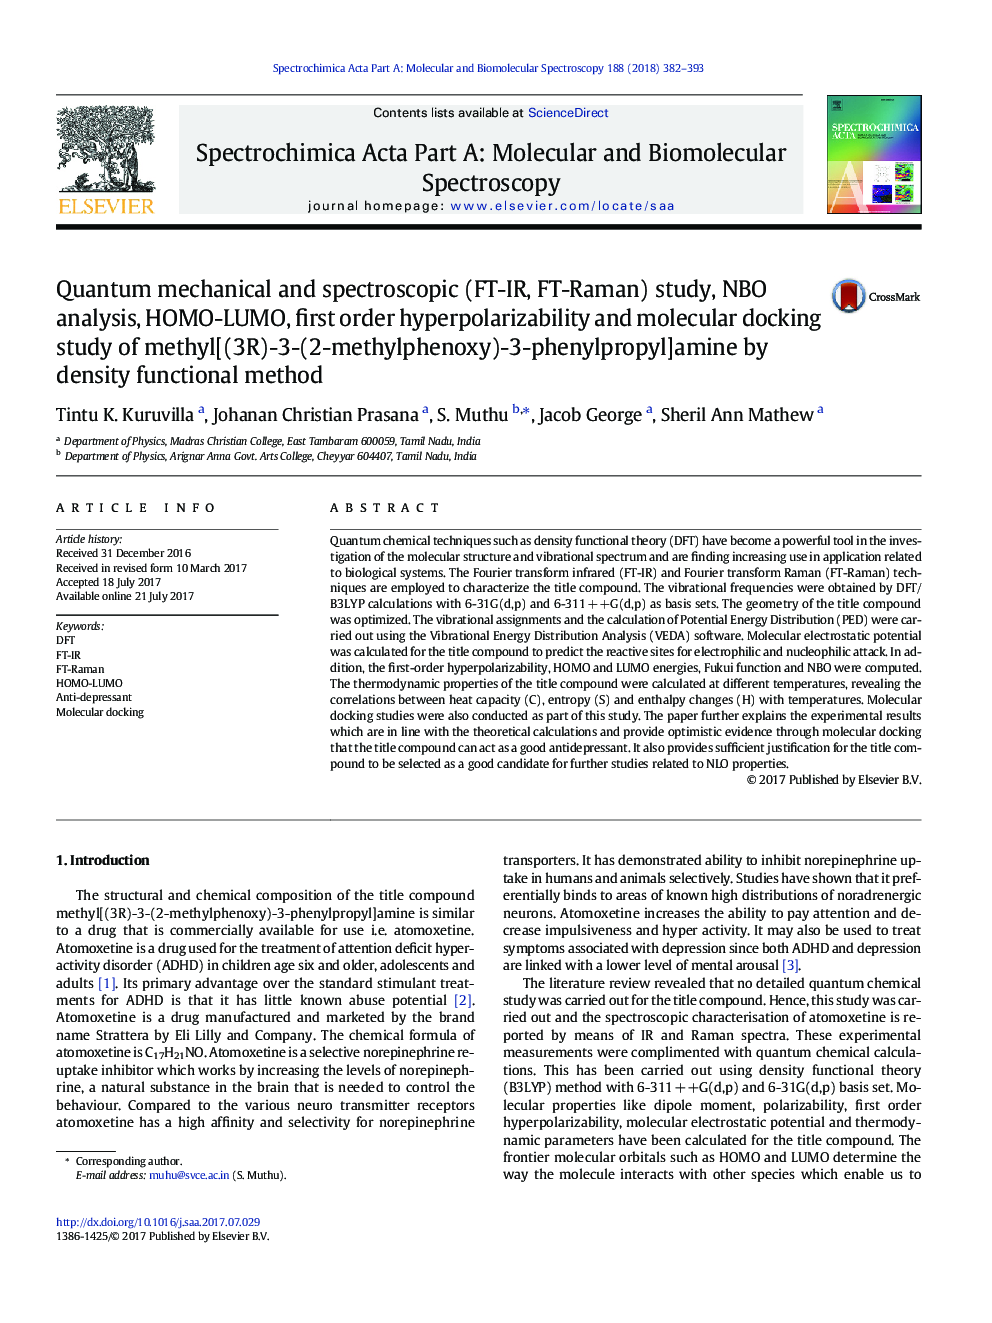 Quantum mechanical and spectroscopic (FT-IR, FT-Raman) study, NBO analysis, HOMO-LUMO, first order hyperpolarizability and molecular docking study of methyl[(3R)-3-(2-methylphenoxy)-3-phenylpropyl]amine by density functional method